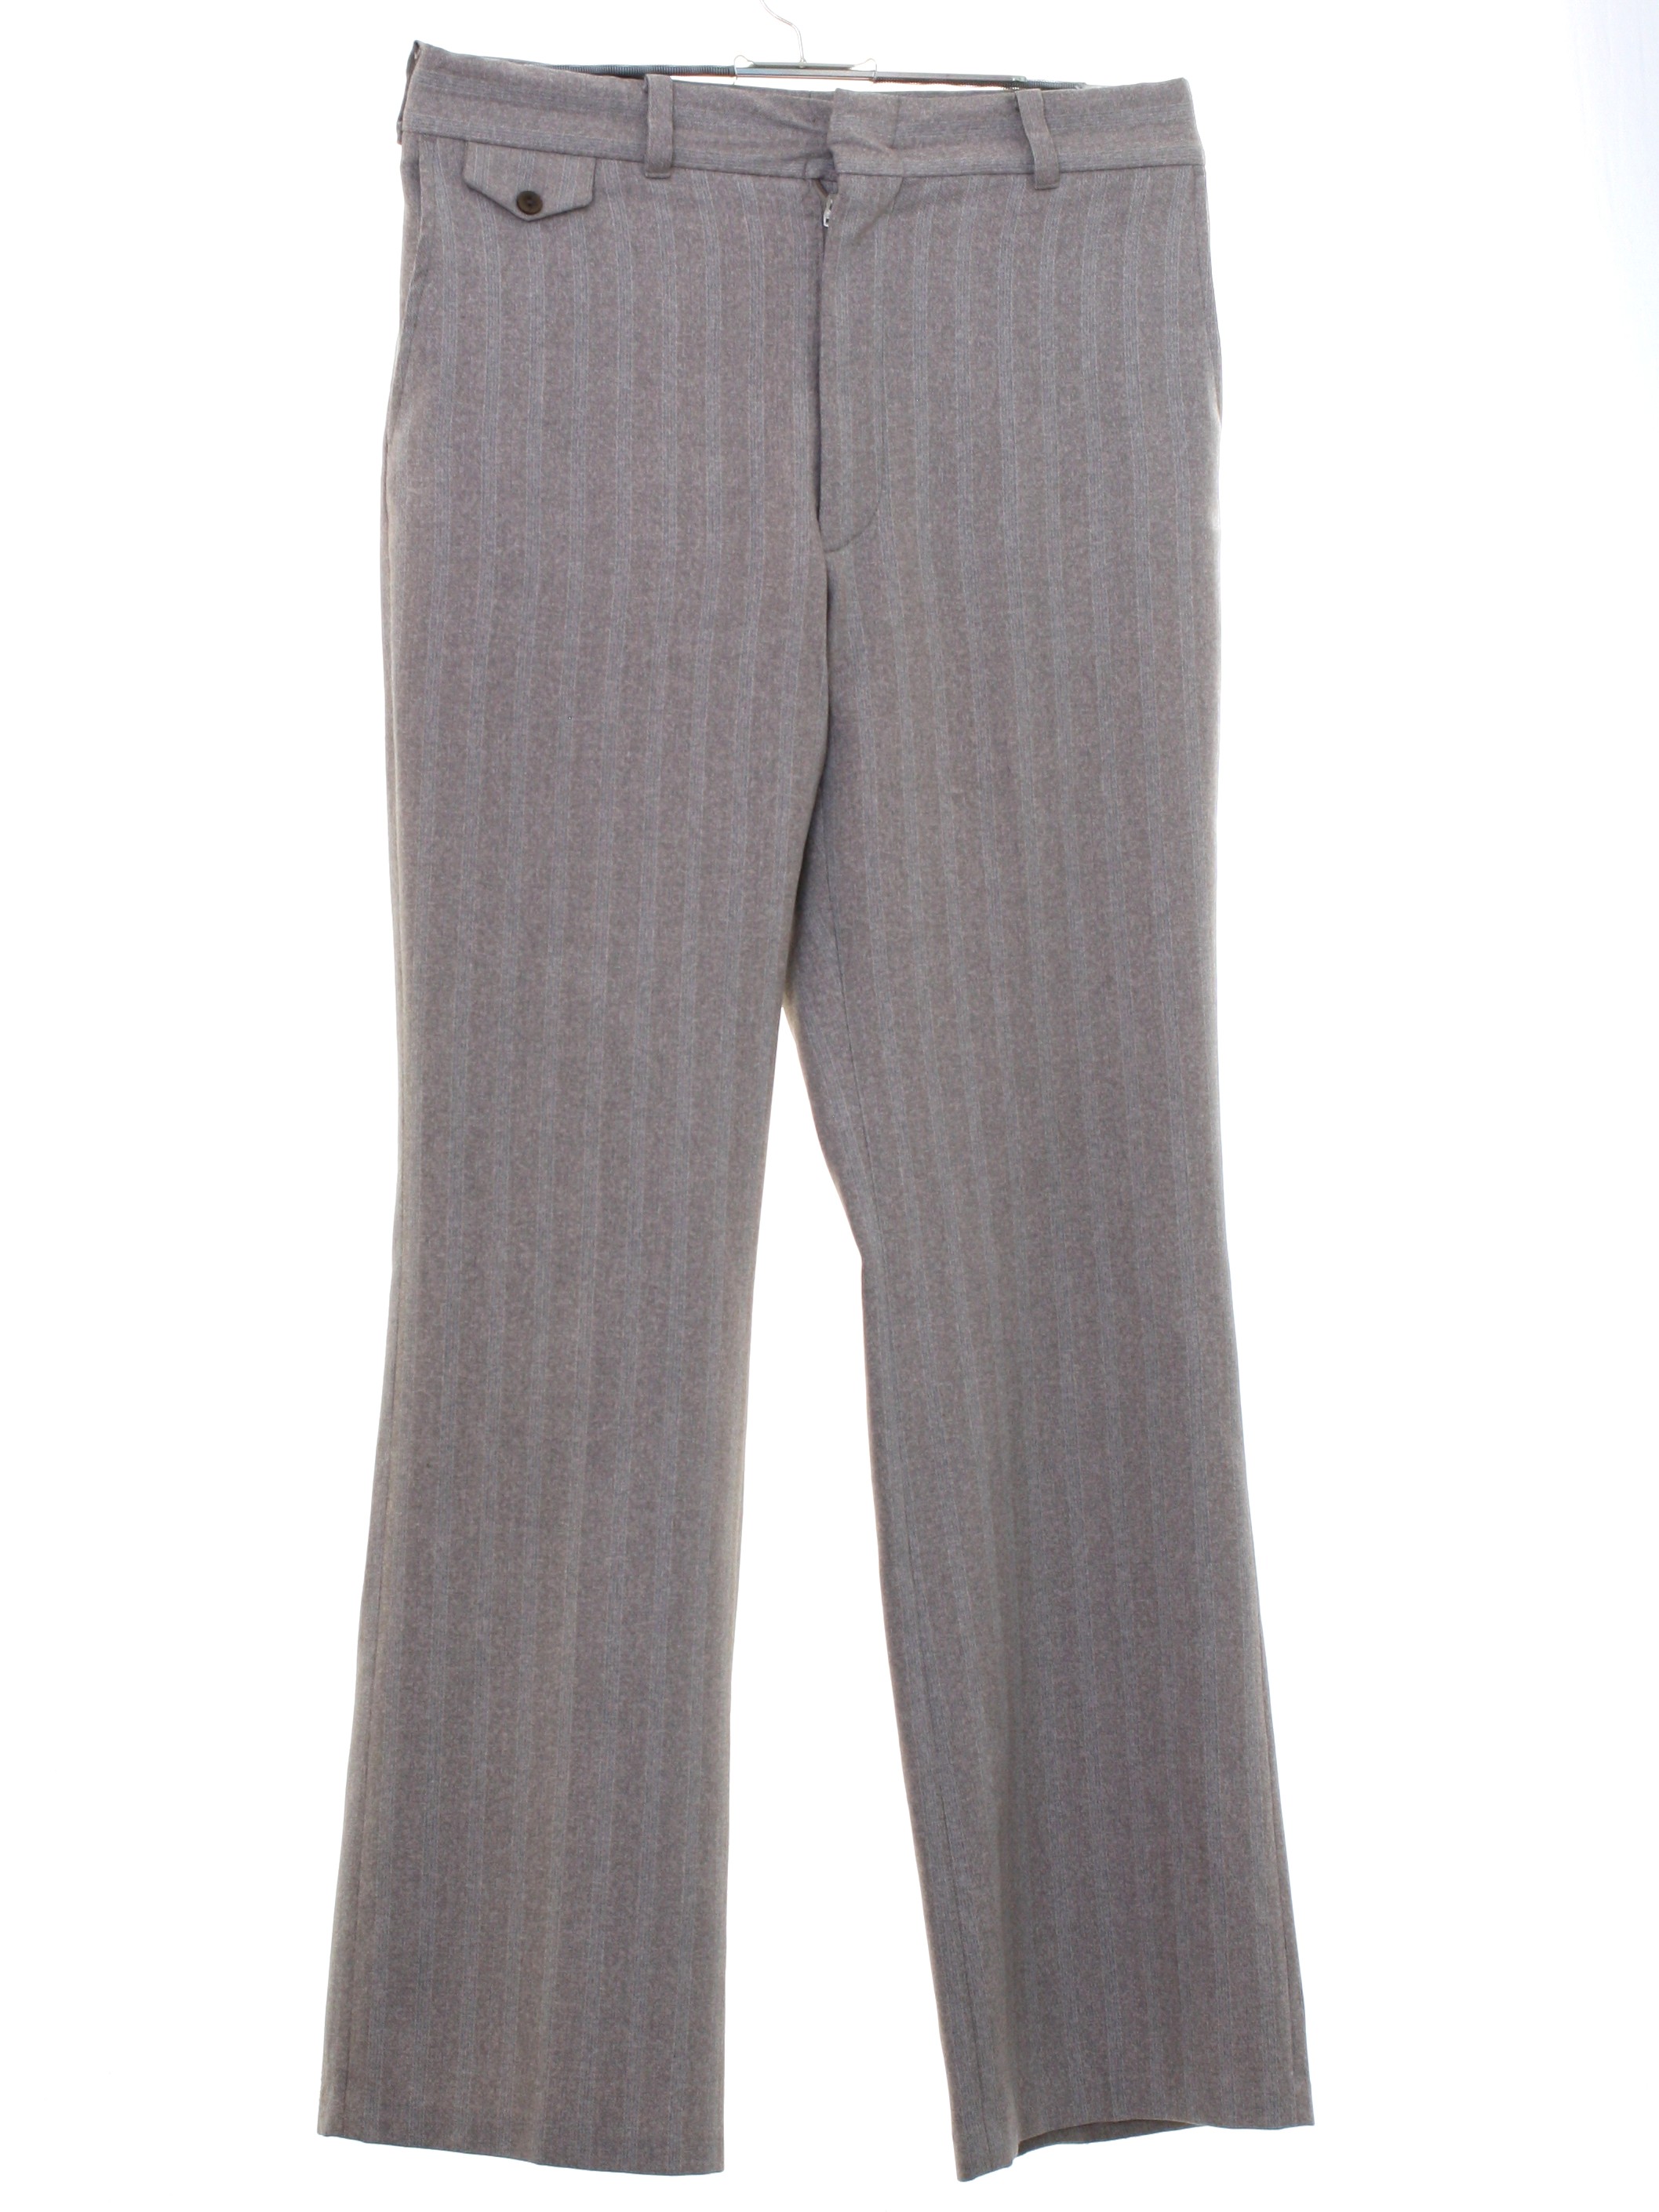 Eighties Vintage Flared Pants / Flares: Early 80s -No Label- Mens taupe ...